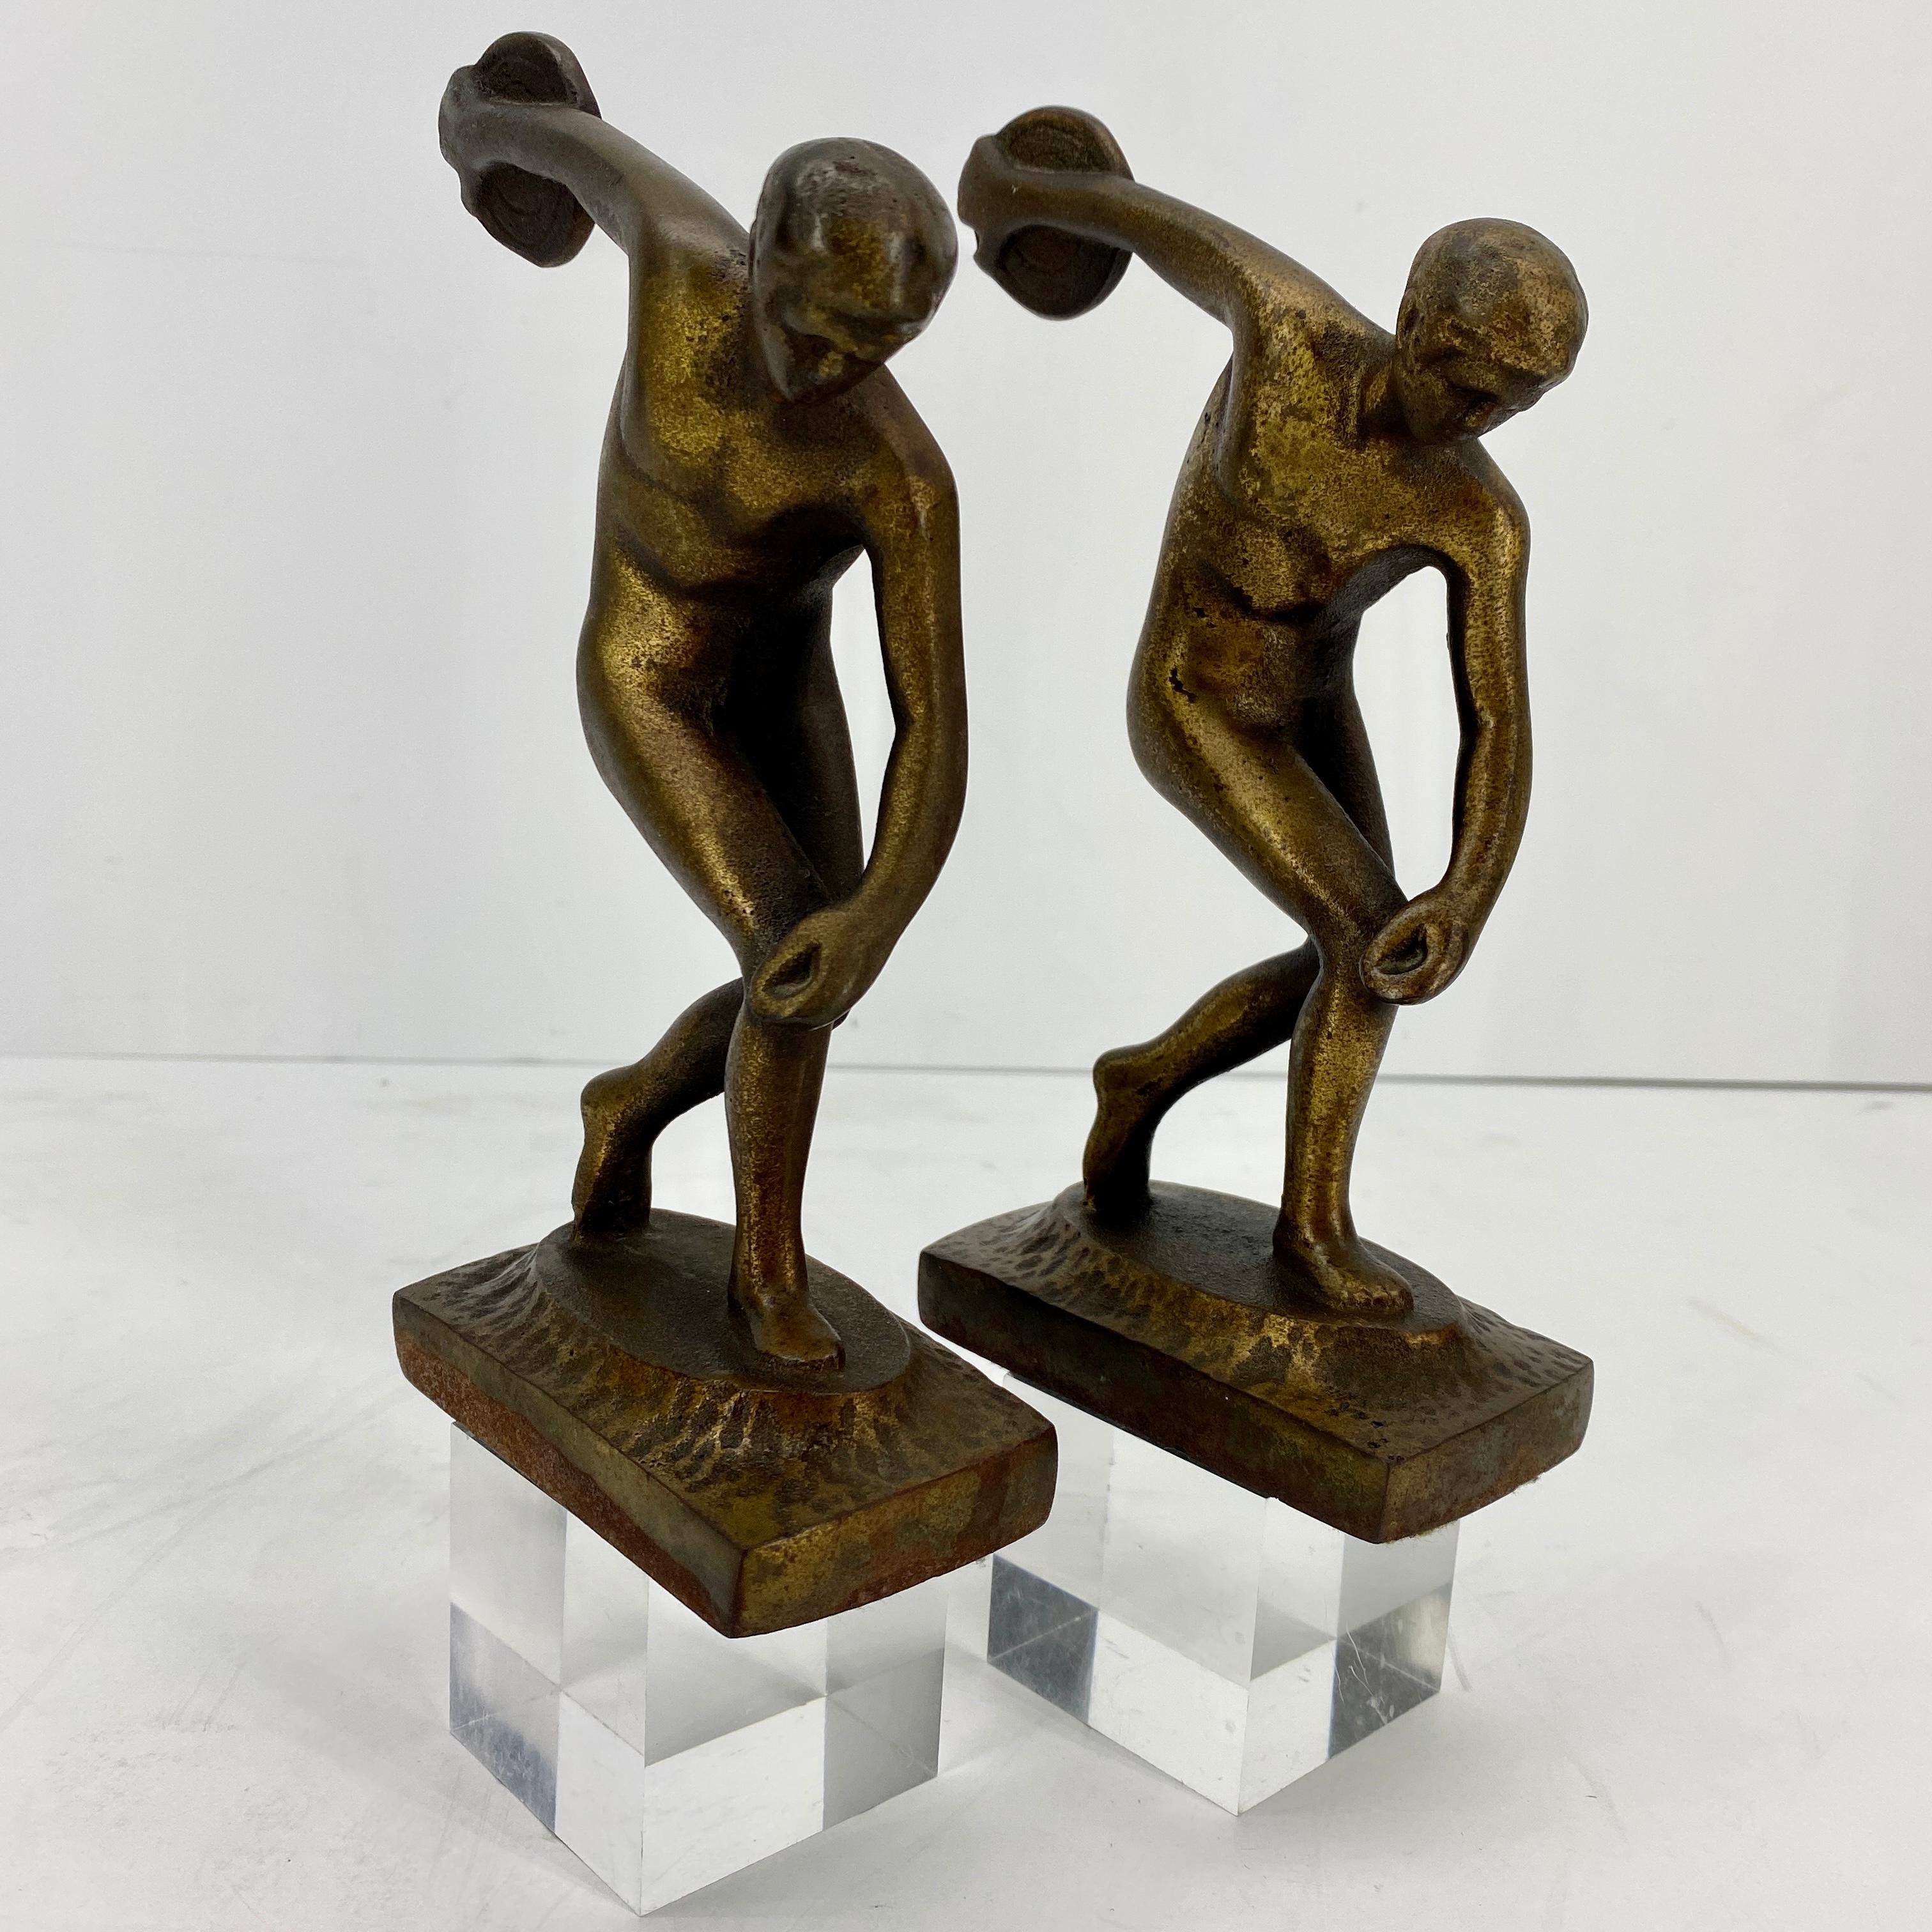 19th Century Vintage Cast Iron and Bronzed Overlay Bookends of Male Discus Thrower